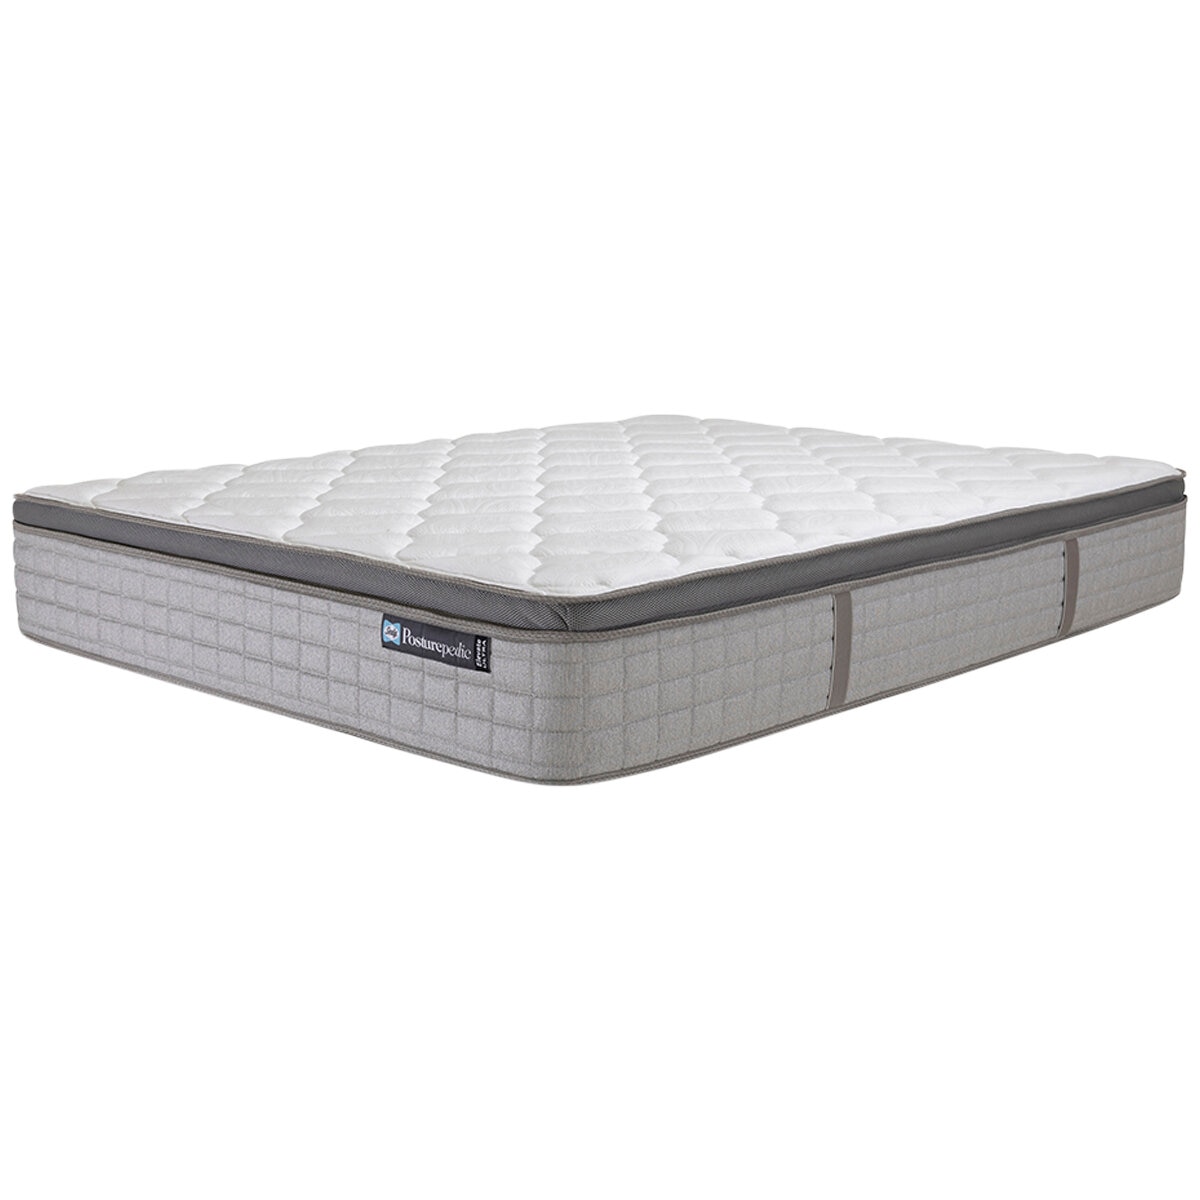 Sealy Posturepedic Elevate Ultra Cotton Charm Firm Double Mattress